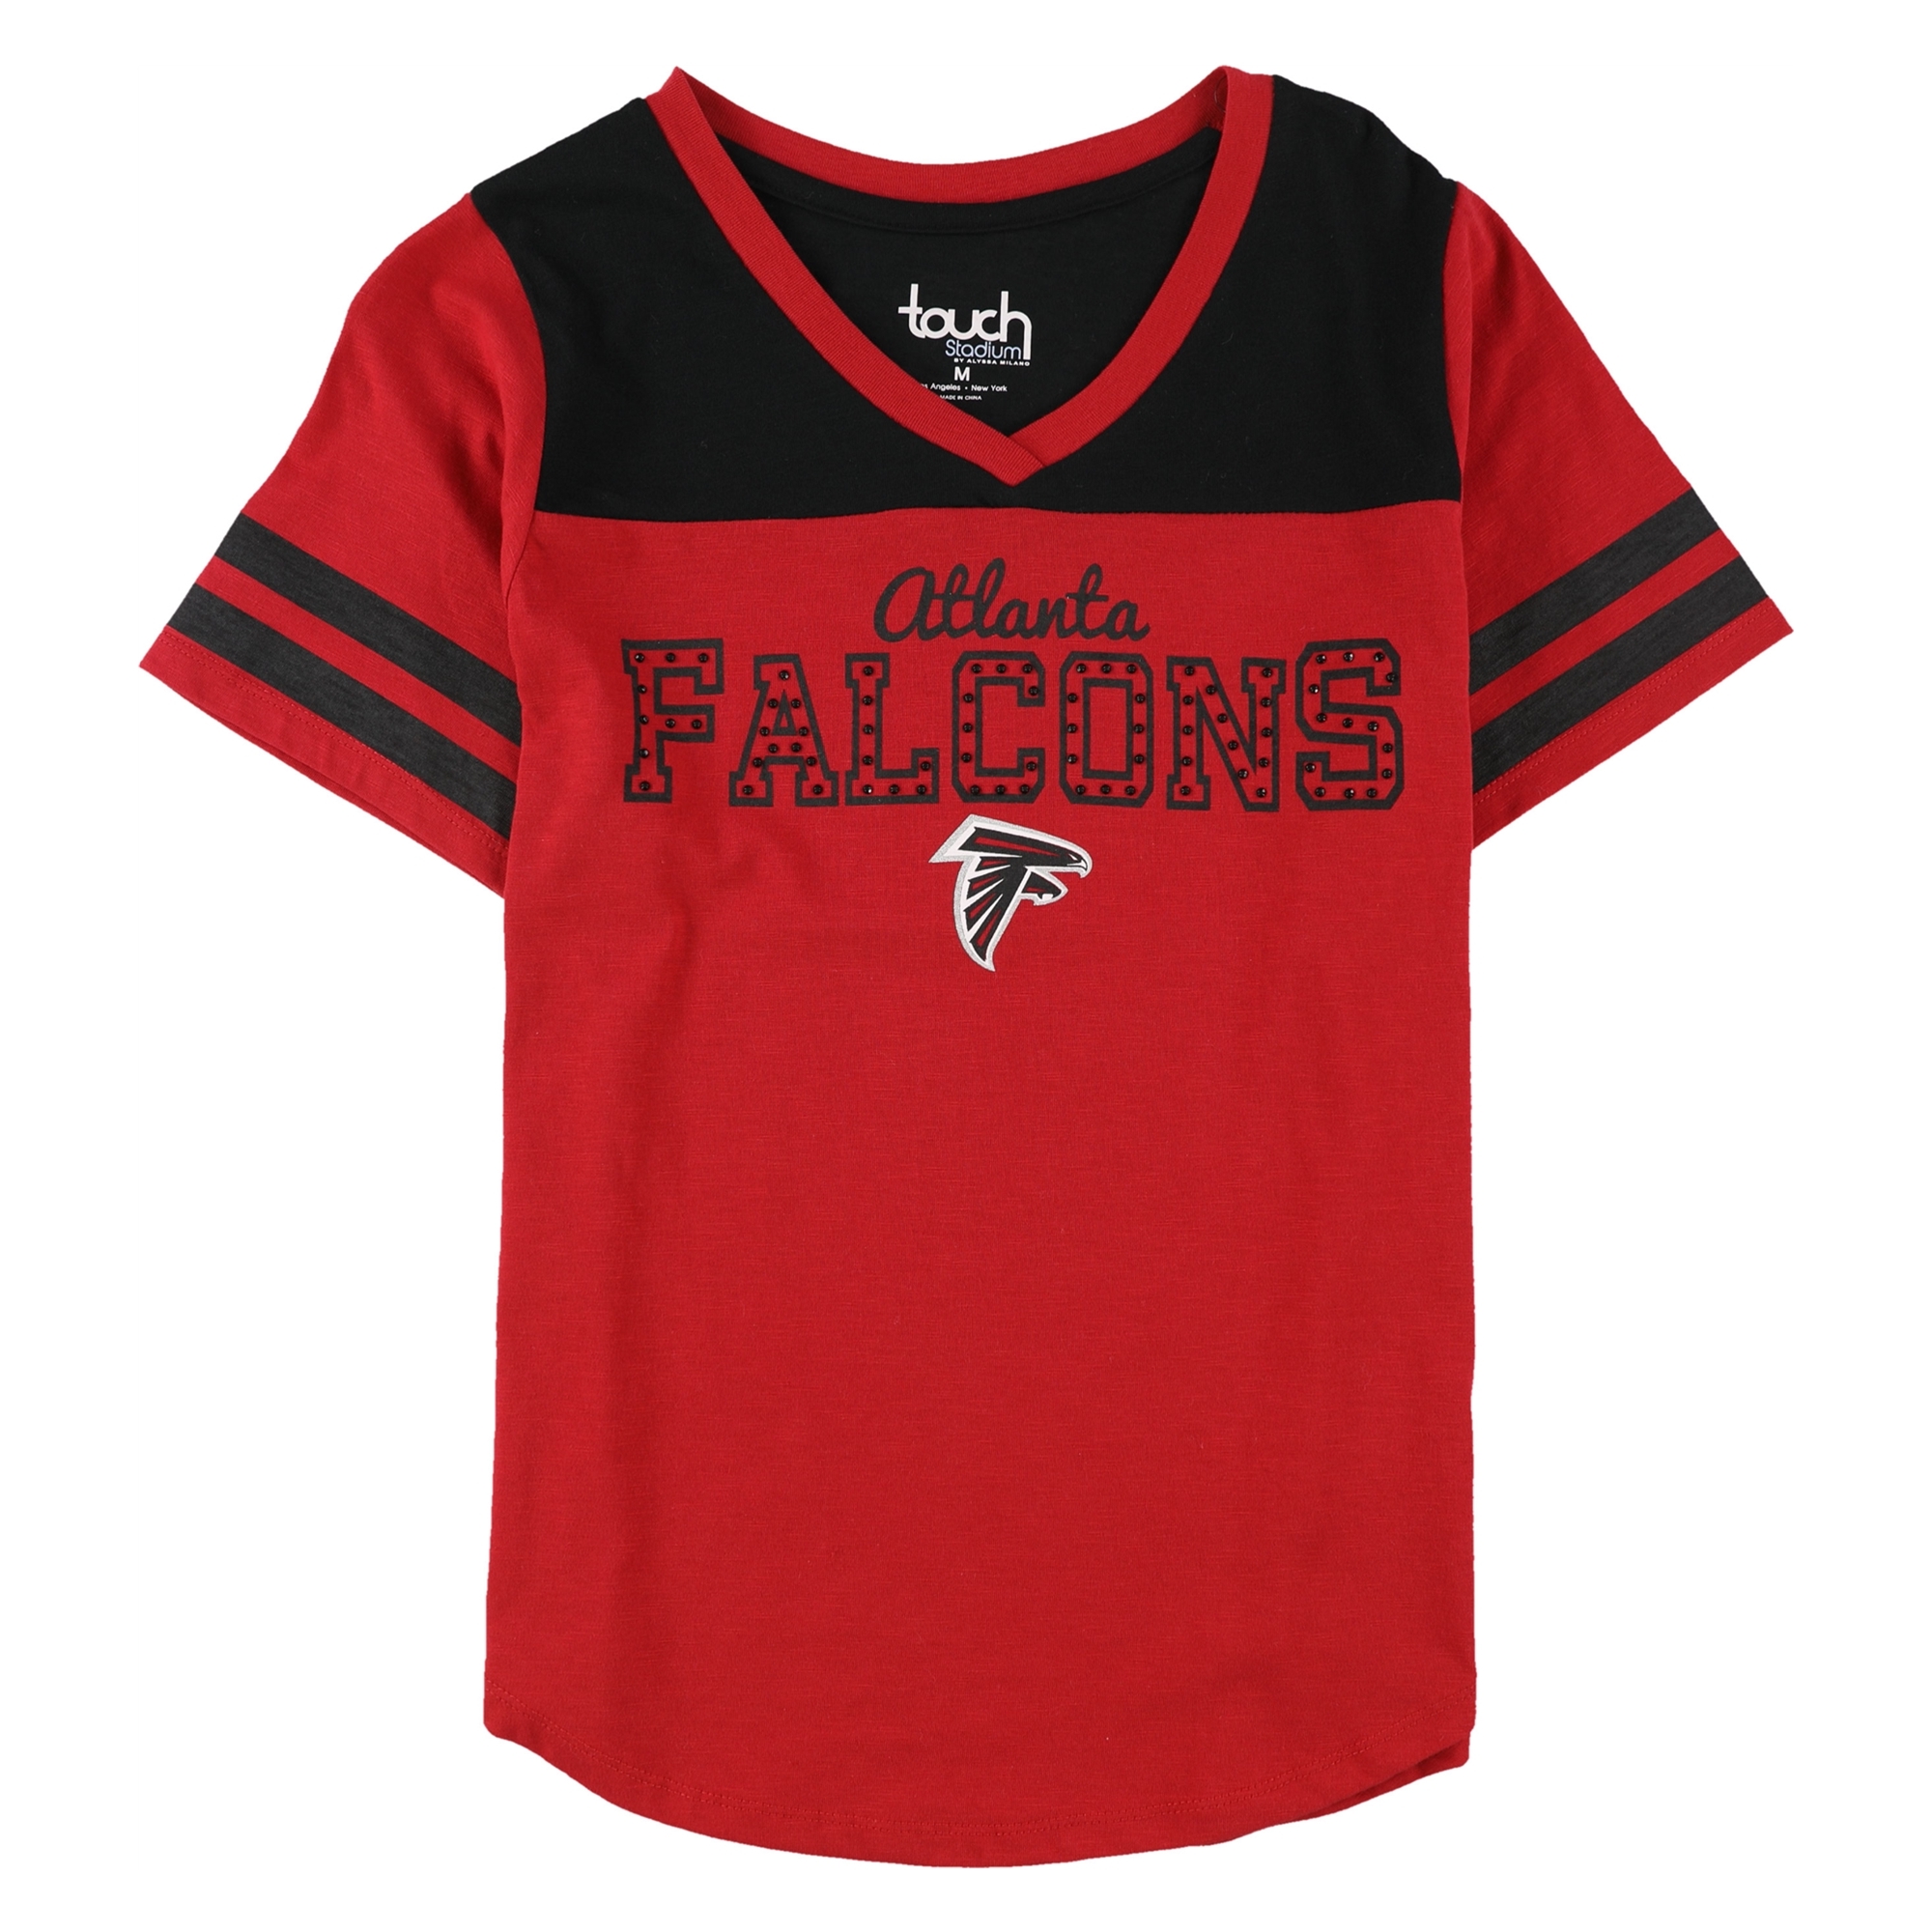 Buy a Touch Womens Atlanta Falcons Embellished T-Shirt, TW2